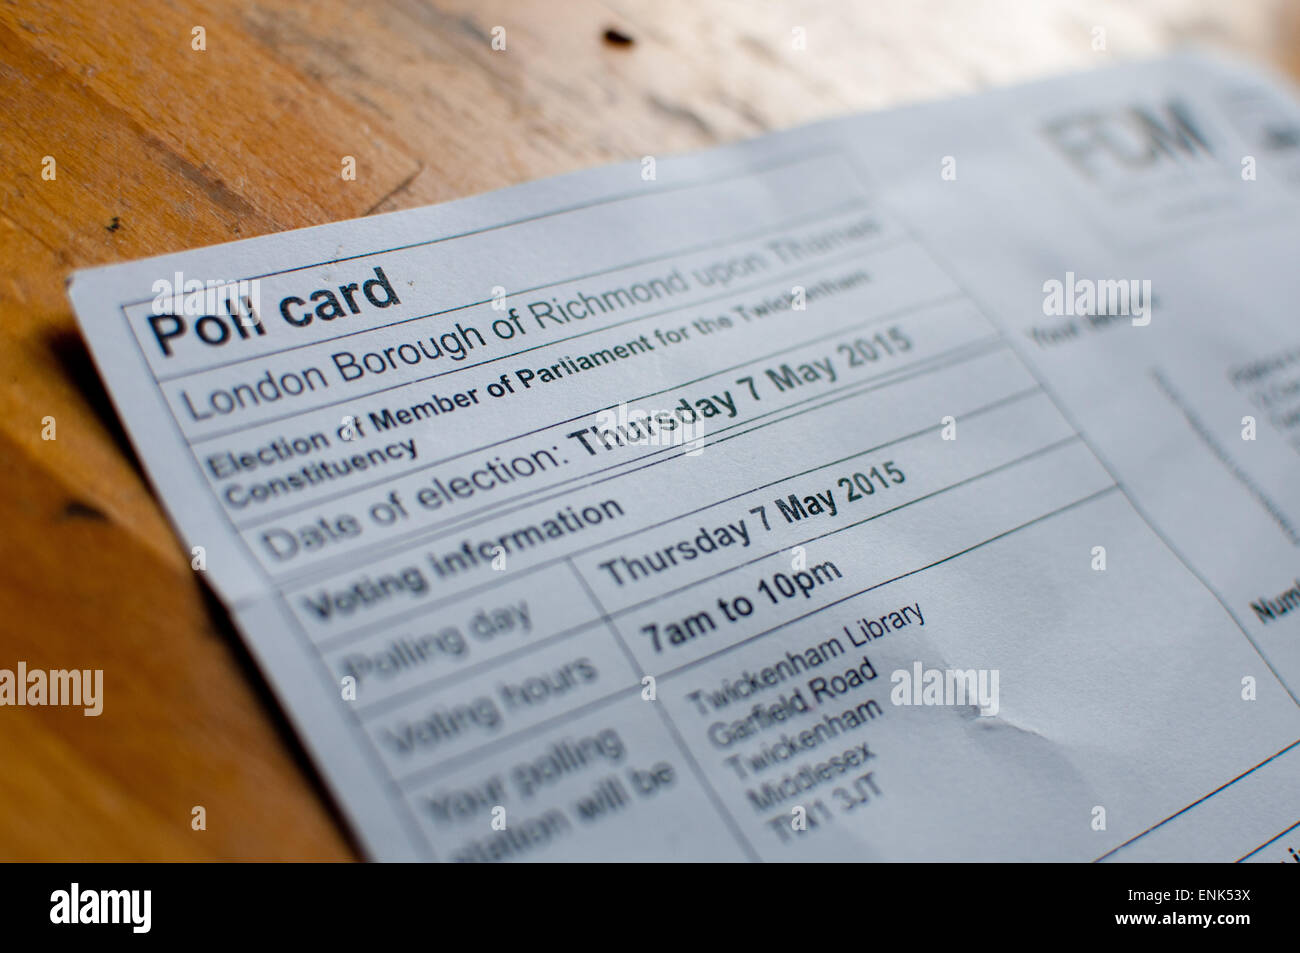 Richmond, London, UK. 07th May, 2015. Poll card for General Election 7th May 2015. London Borough of Richmond. Polling station Twickenham Library Middlesex. Credit:  Tricia de Courcy Ling/Alamy Live News Stock Photo